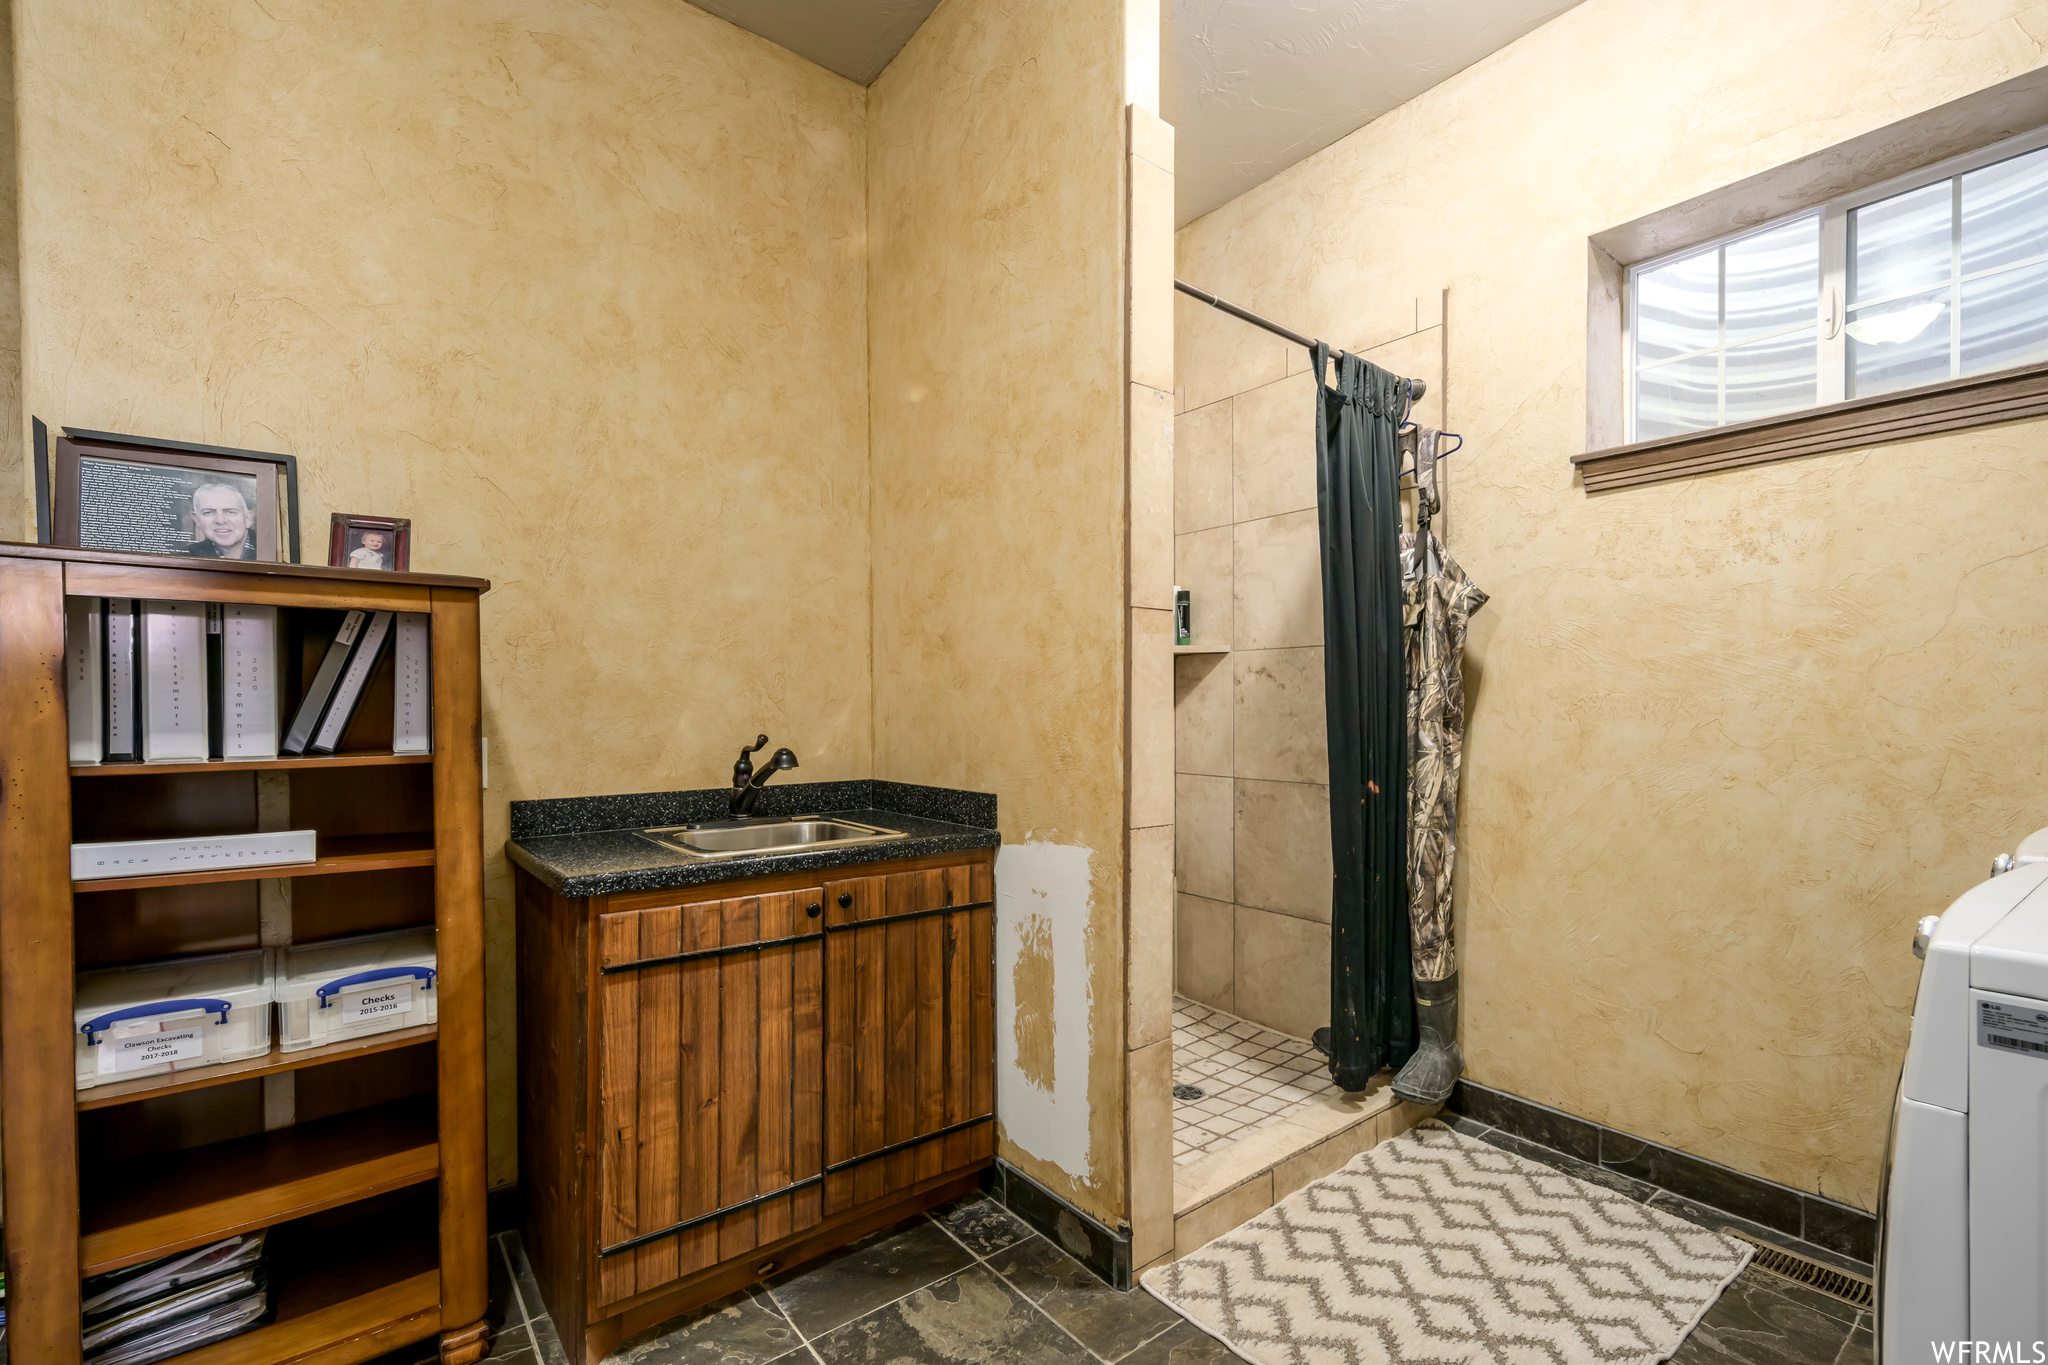 Bathroom with curtained shower, washer / dryer, vanity, and tile flooring